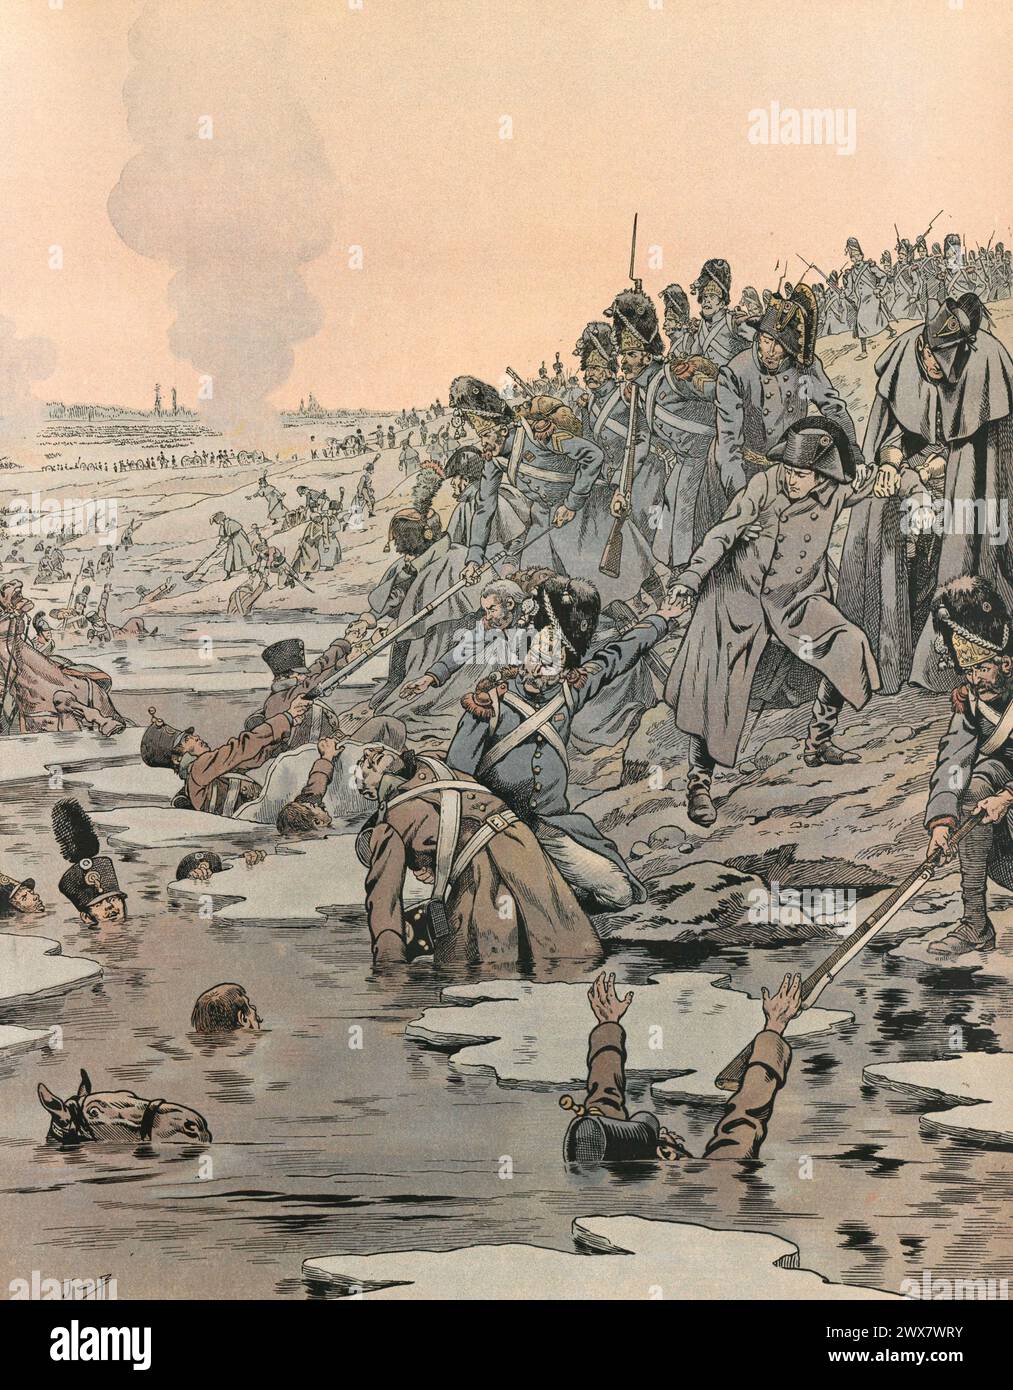 Napoleon I helping soldiers of the Grande Armée, as well as Russians, to go out of a muddy lake. Battle of Austerlitz, 2 December 1805.  Illustration by Job from the book 'Napoléon' written by Georges Montorgueil, published in 1921 by Boivin (Paris). Stock Photo